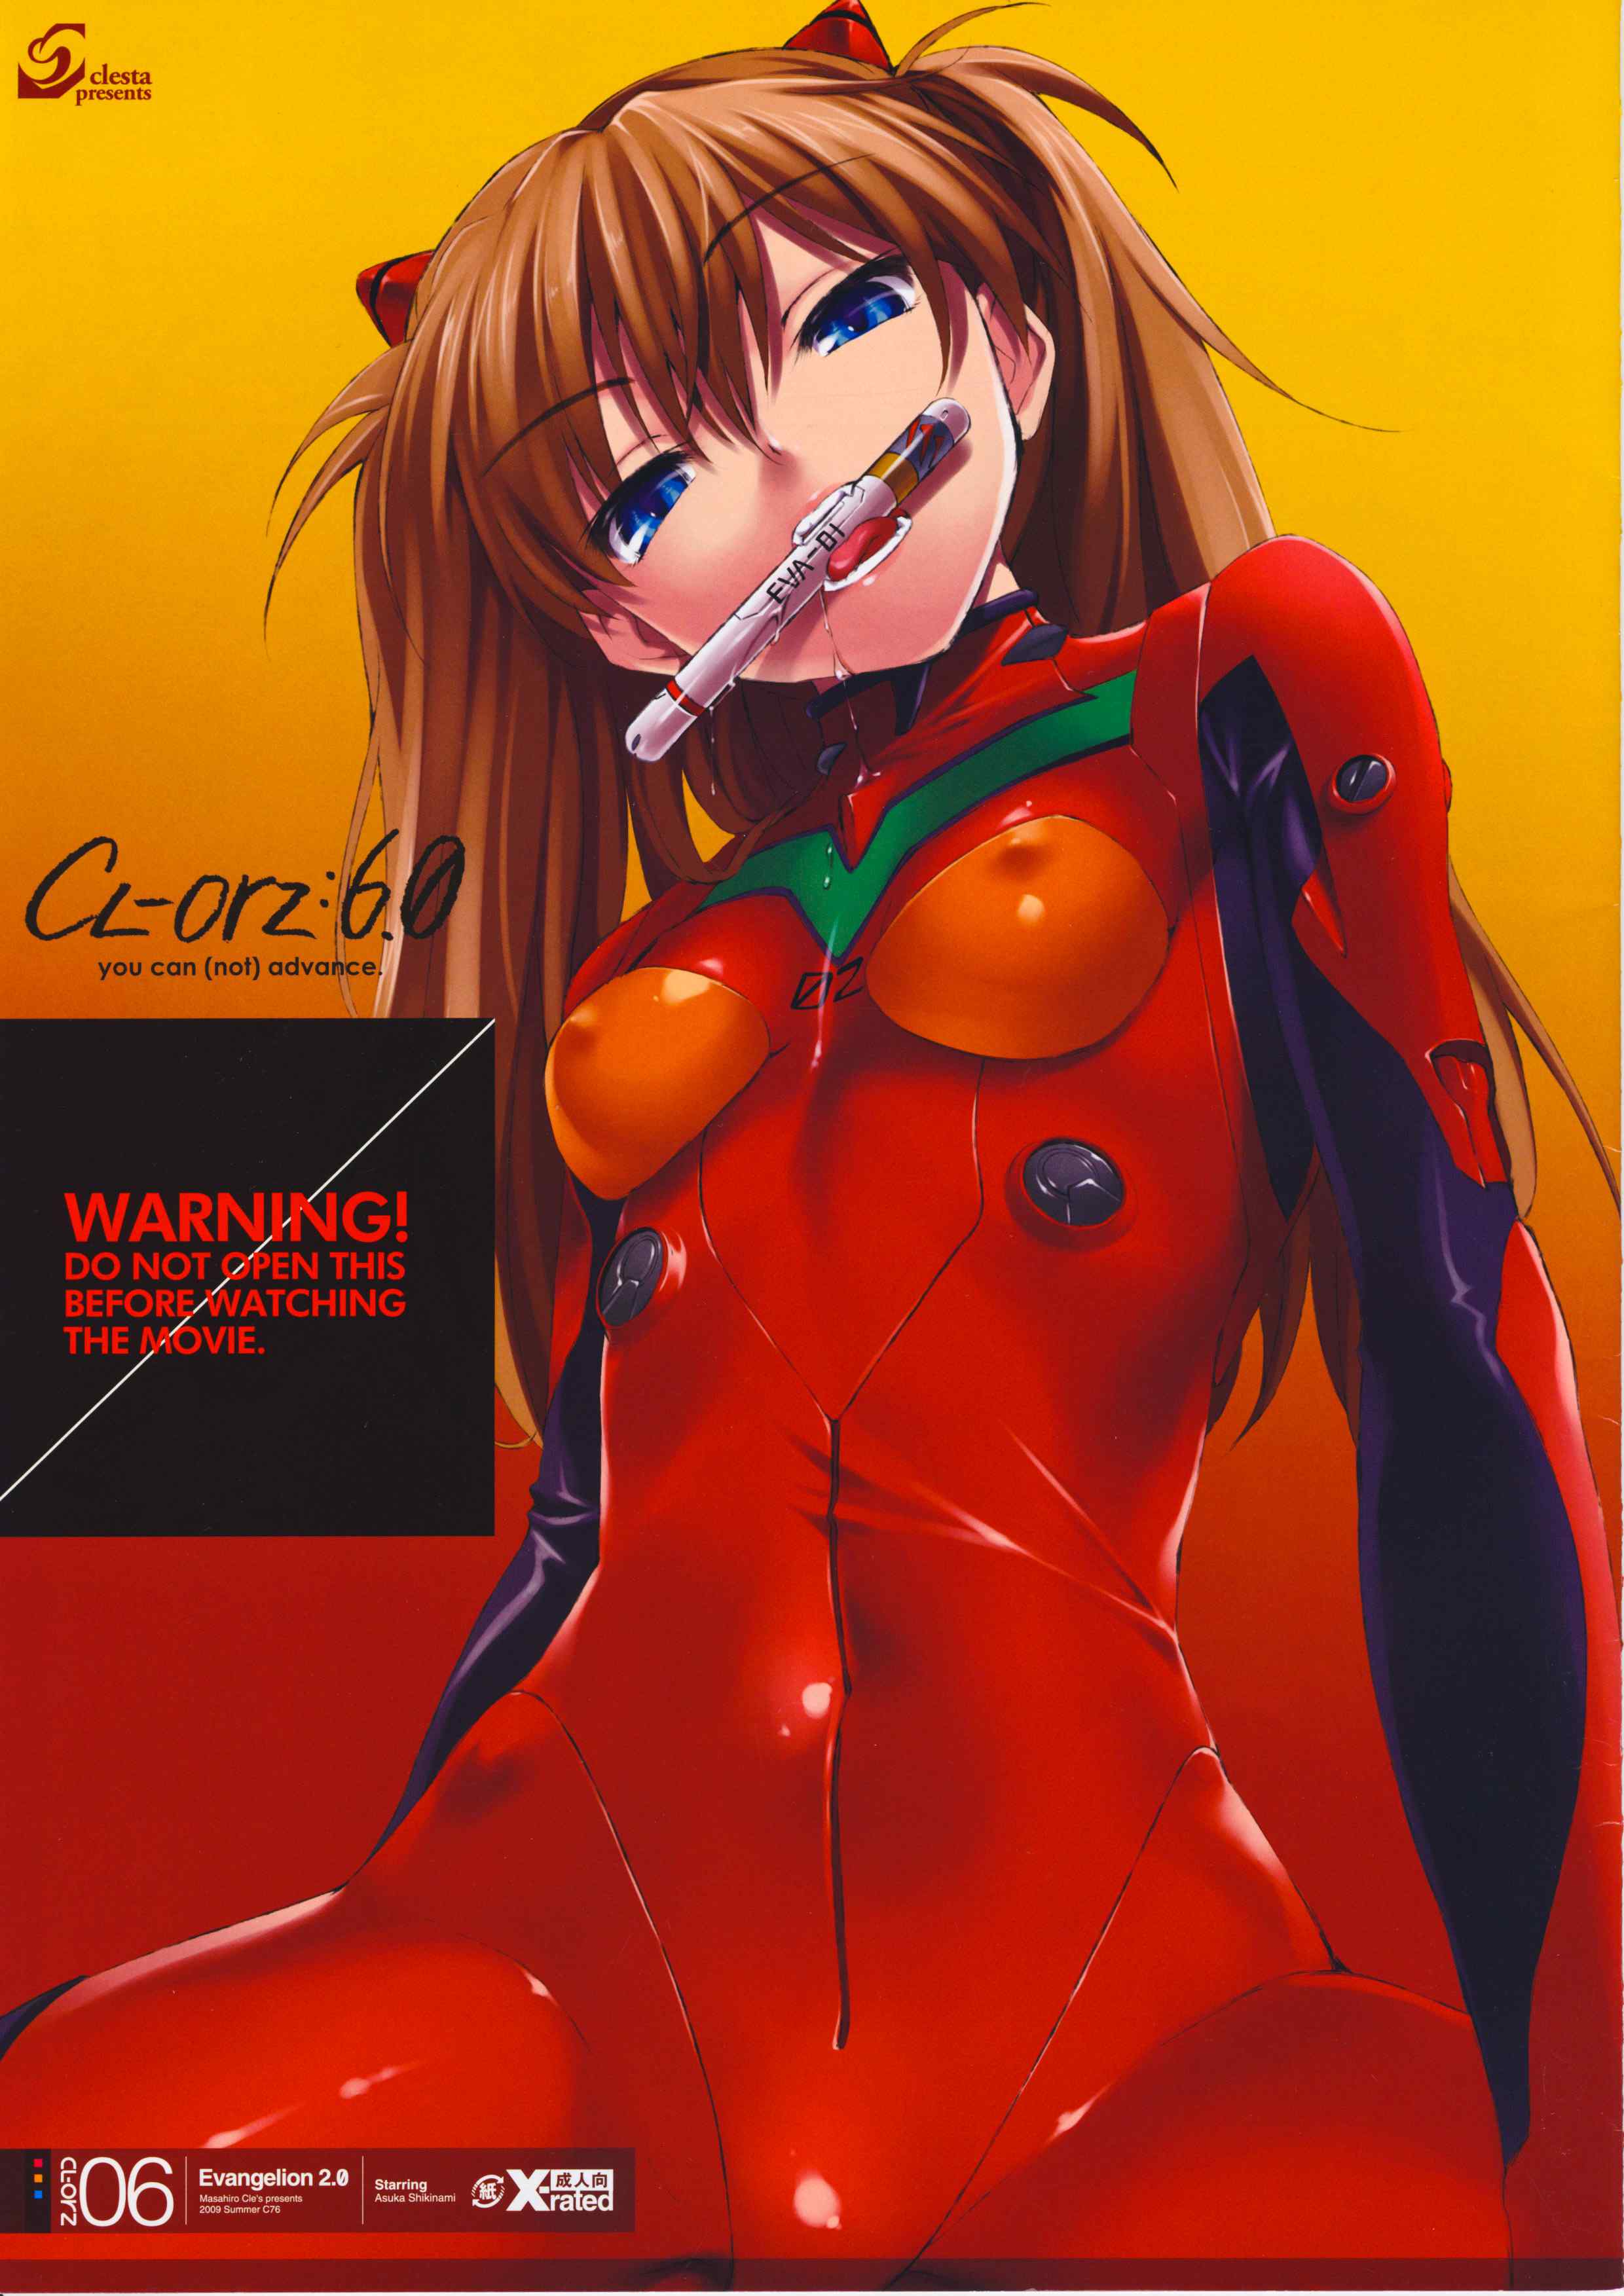 Reading Cl Orz Original Hentai By Cle Masahiro 6 Cl Orz 06 Neon